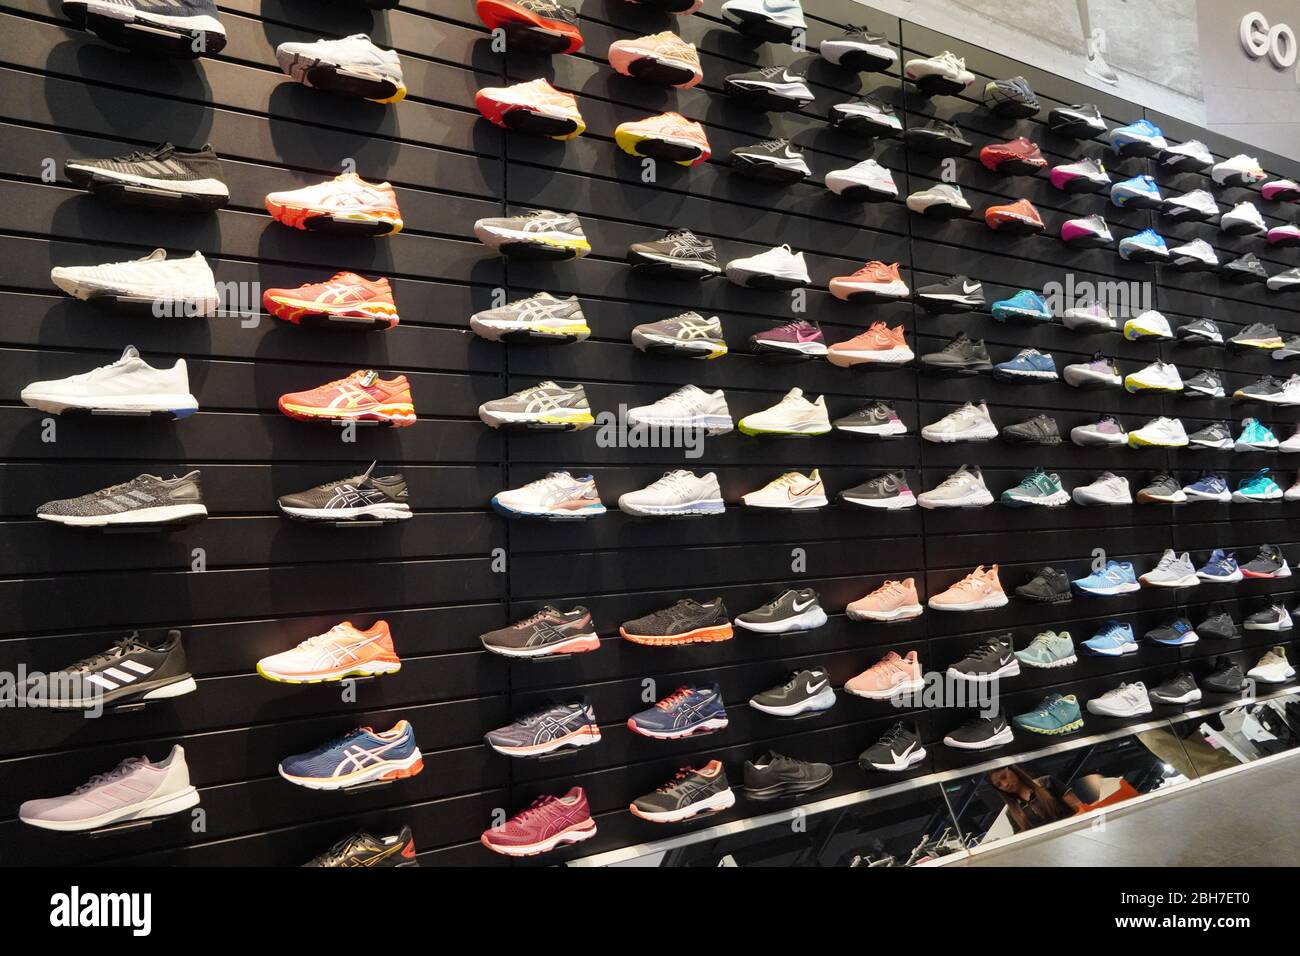 Inside A Shoe Shop High Resolution Stock Photography and Images - Alamy